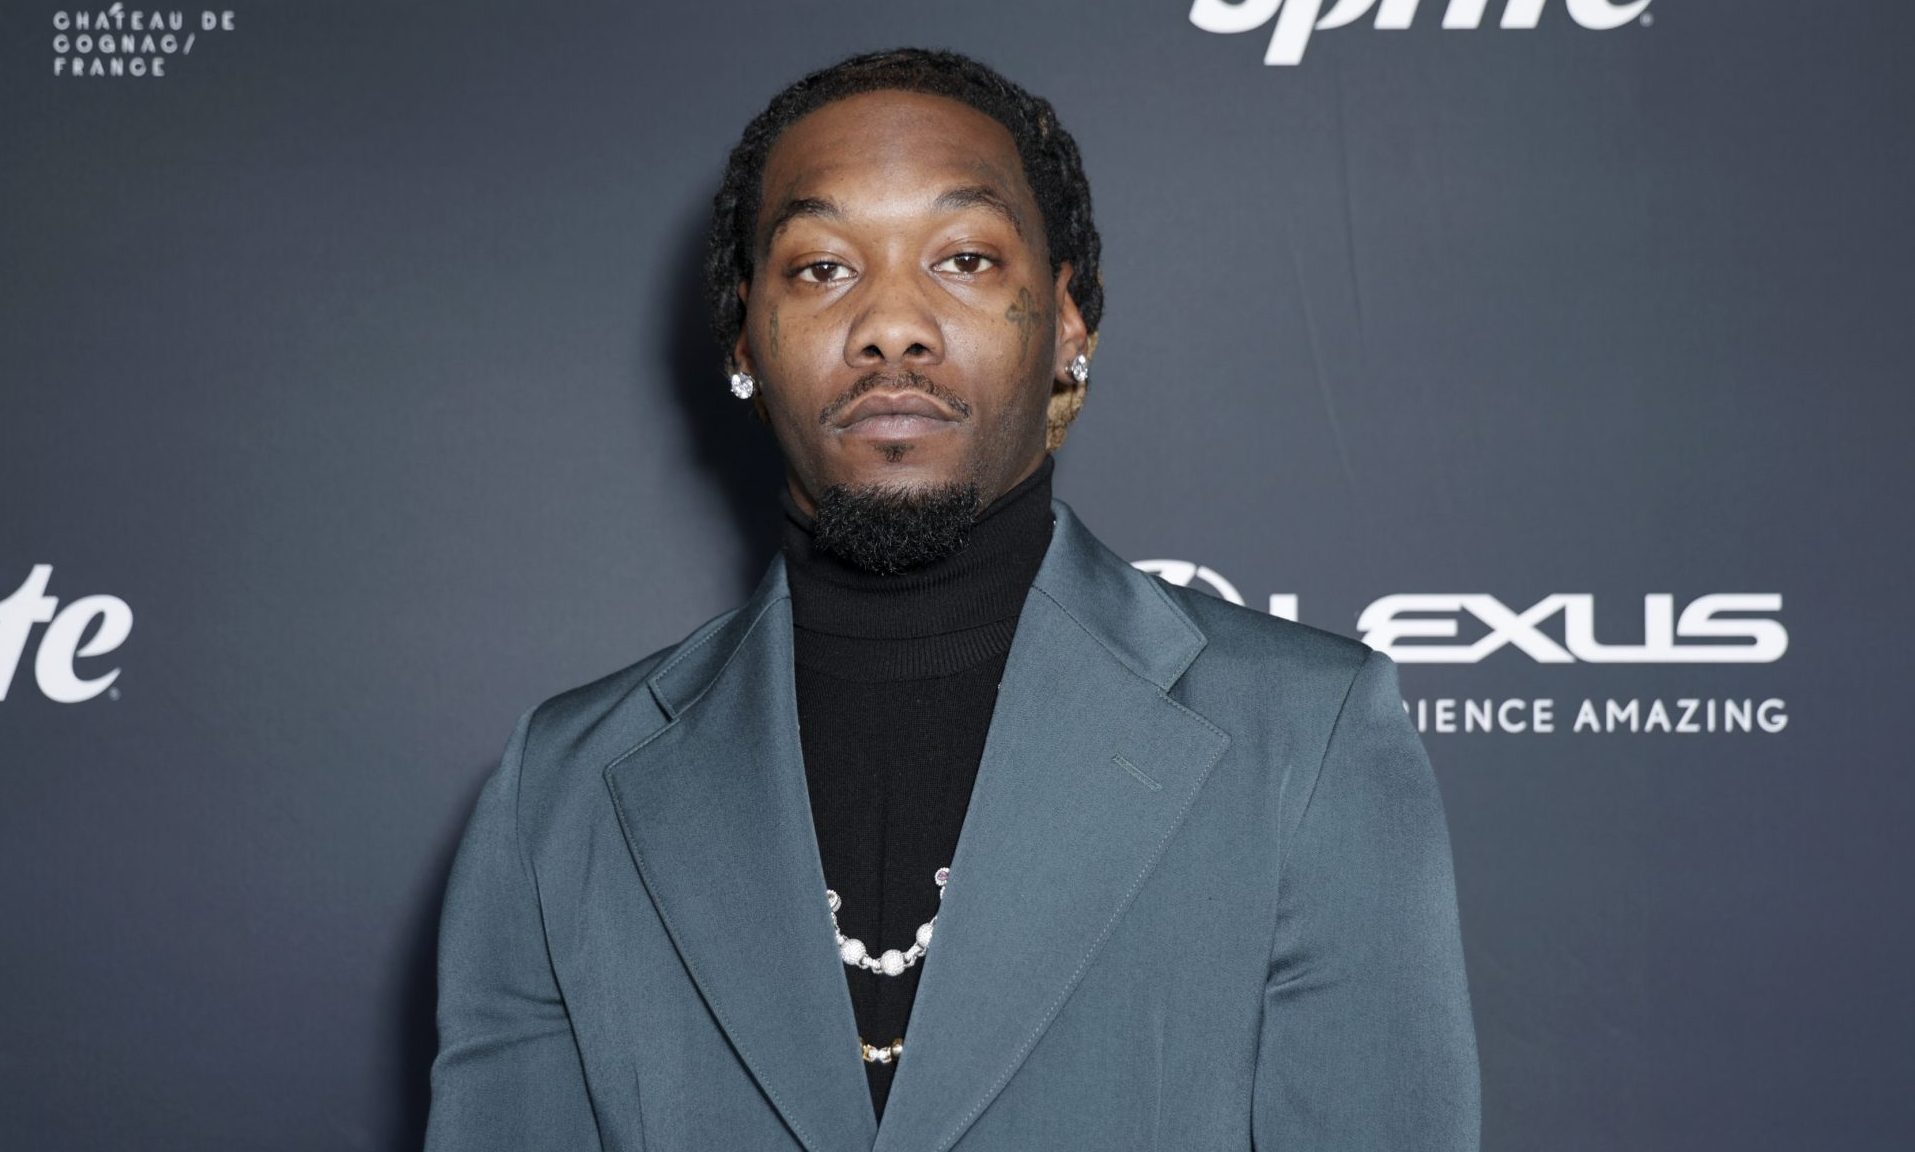 (WATCH) Offset Responds To J. Prince Sending Podcast Warning: ‘How Dare One Of Y’all…Speak On Me And Take’